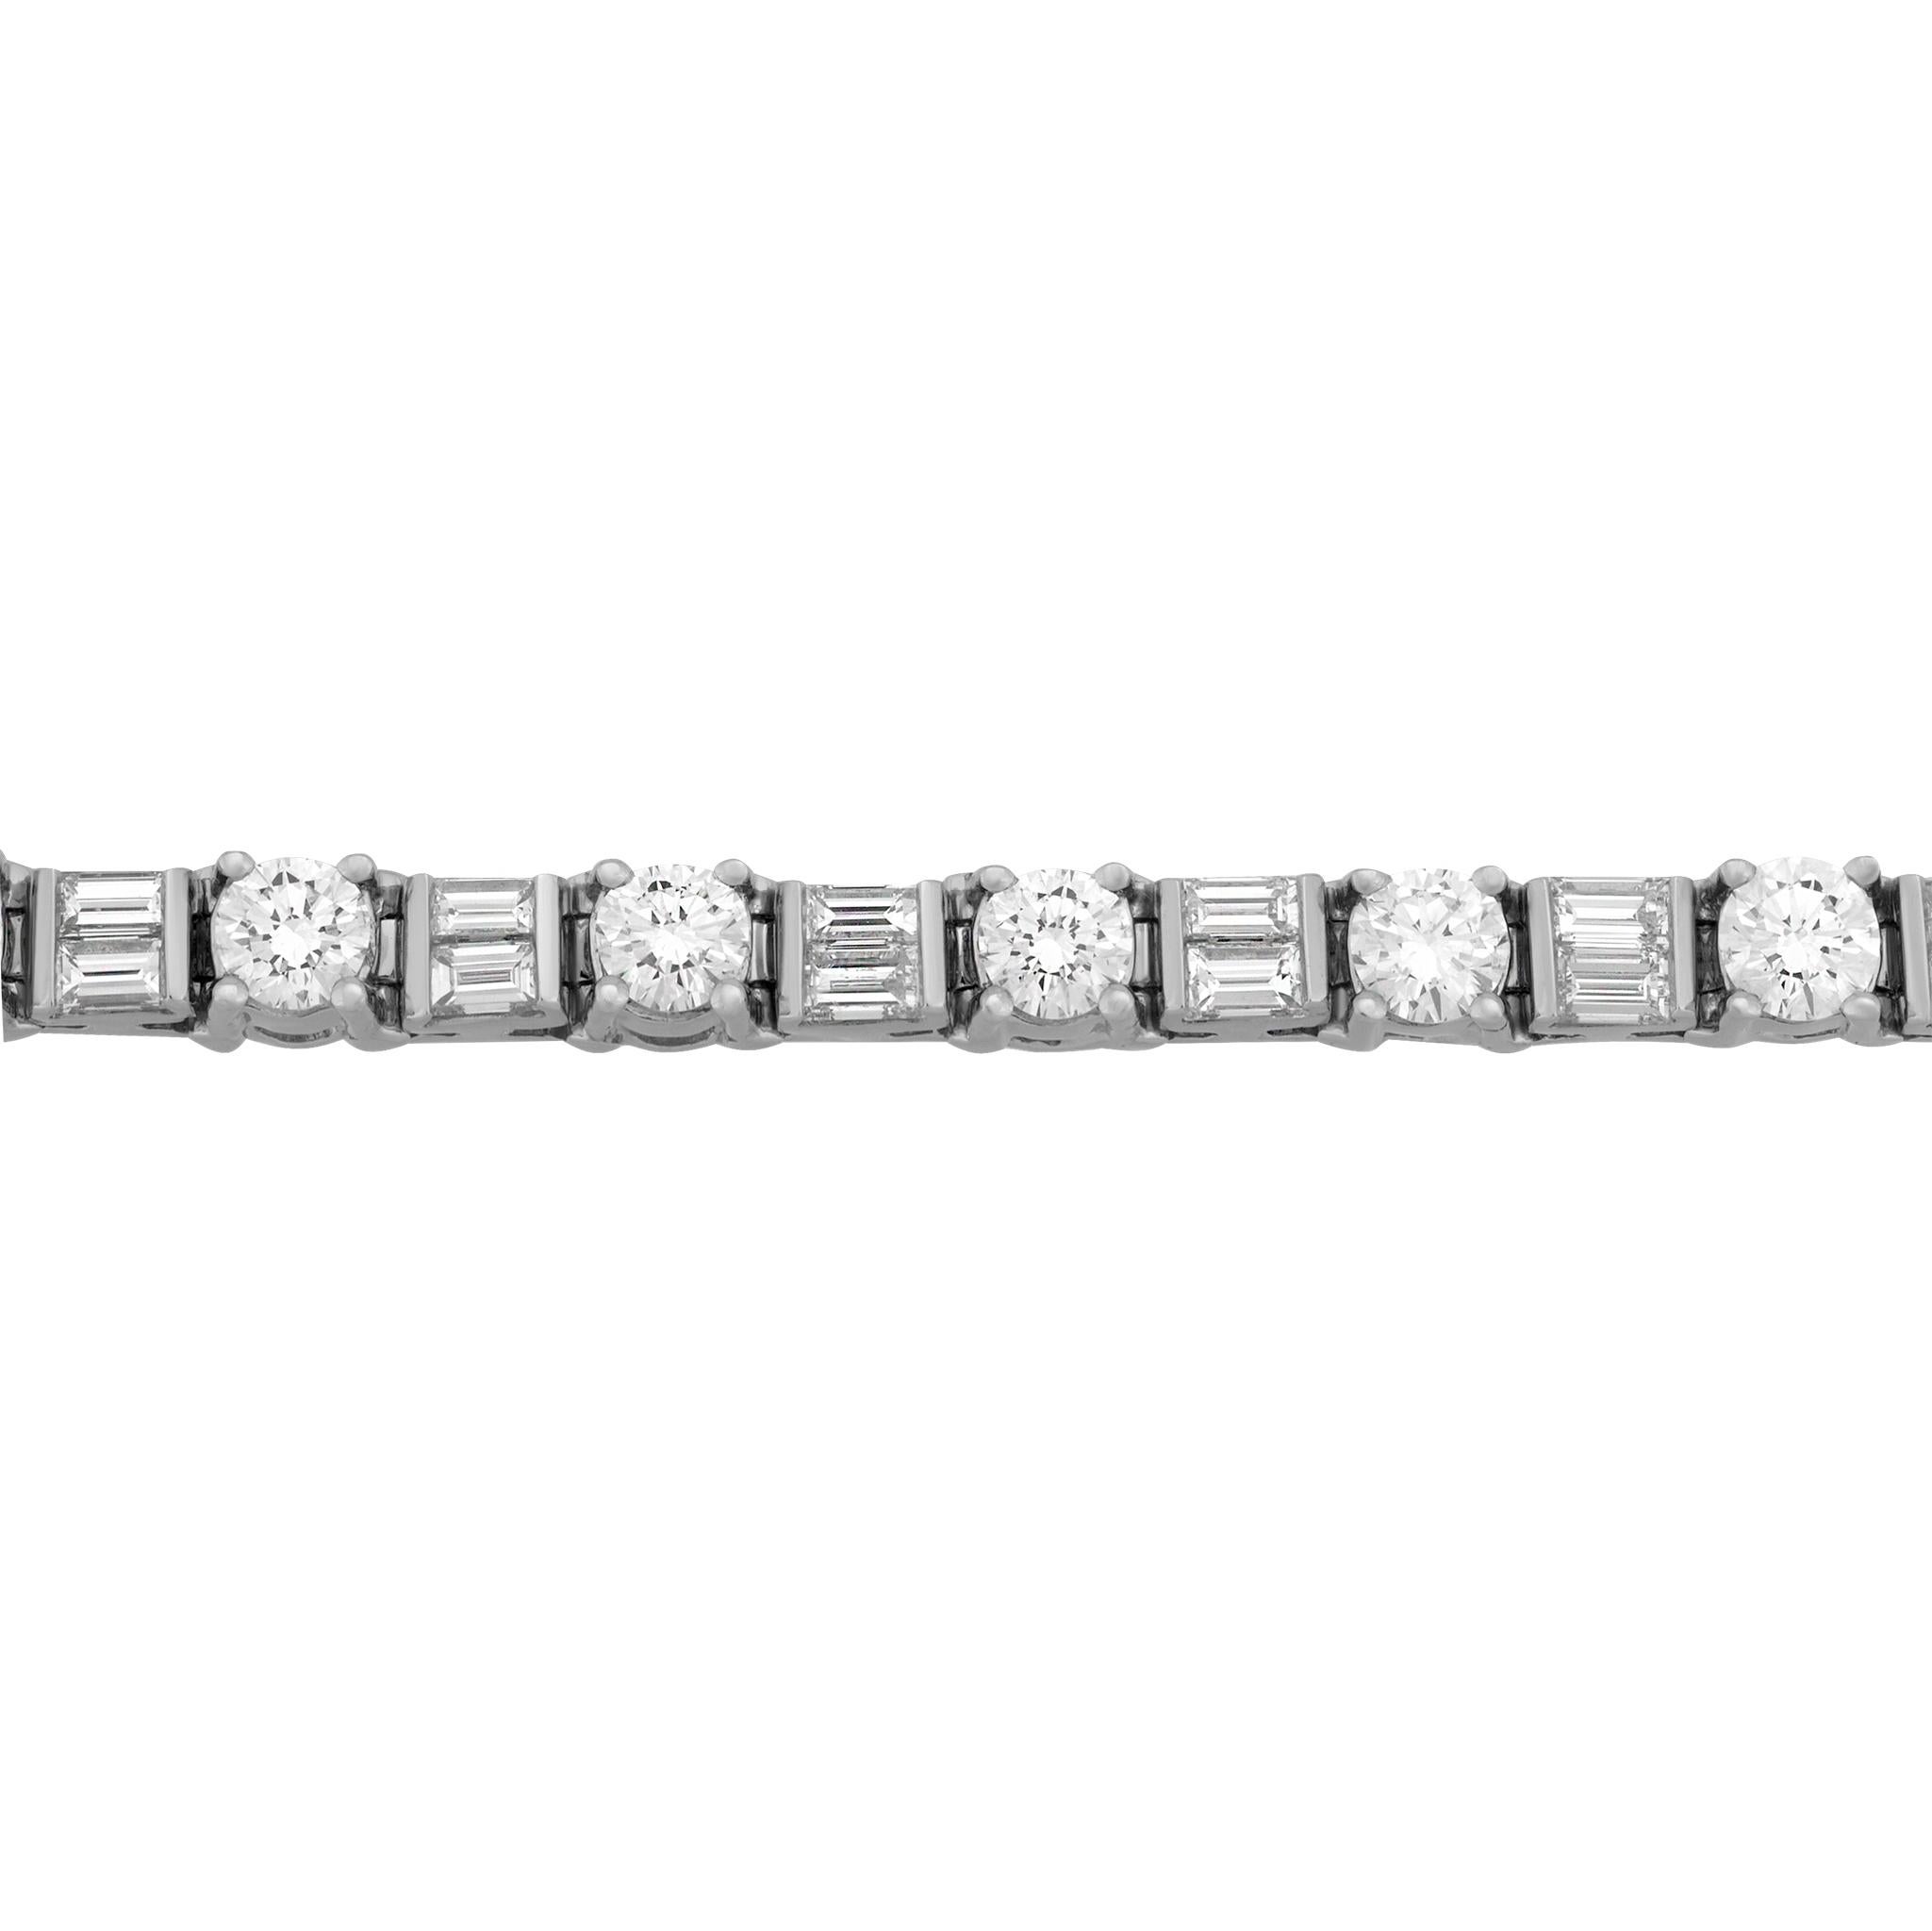 METAL TYPE: Platinum
STONE WEIGHT: 7ct twd estimated
TOTAL WEIGHT: 28.0g
BRACELET LENGTH: 7